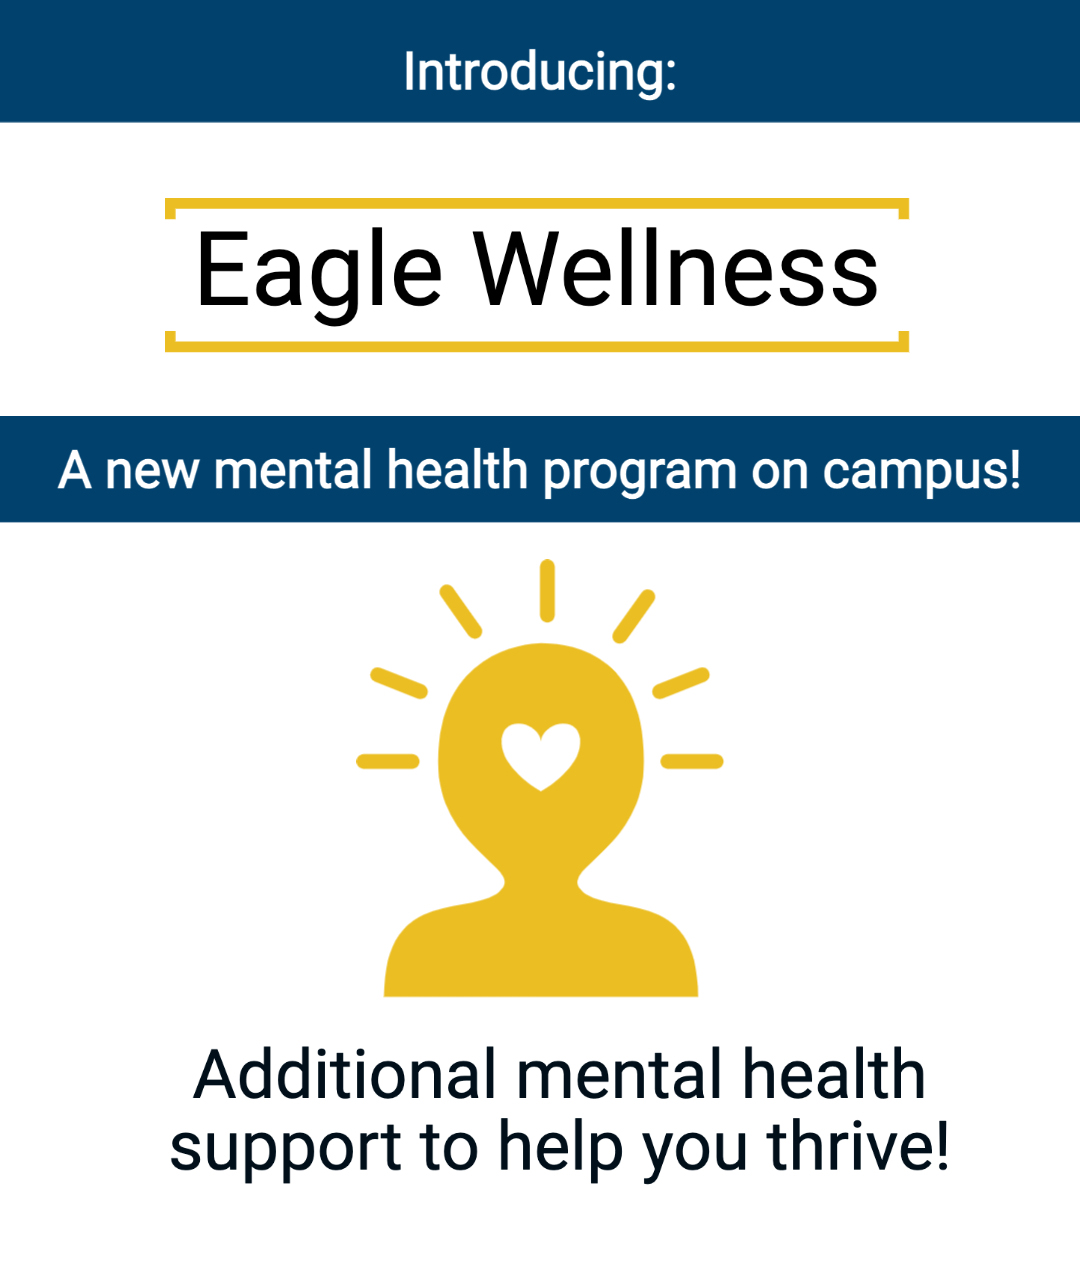 Introducing Eagle Wellness, a new mental health program on campus. Additional Mental health support to help you thrive!